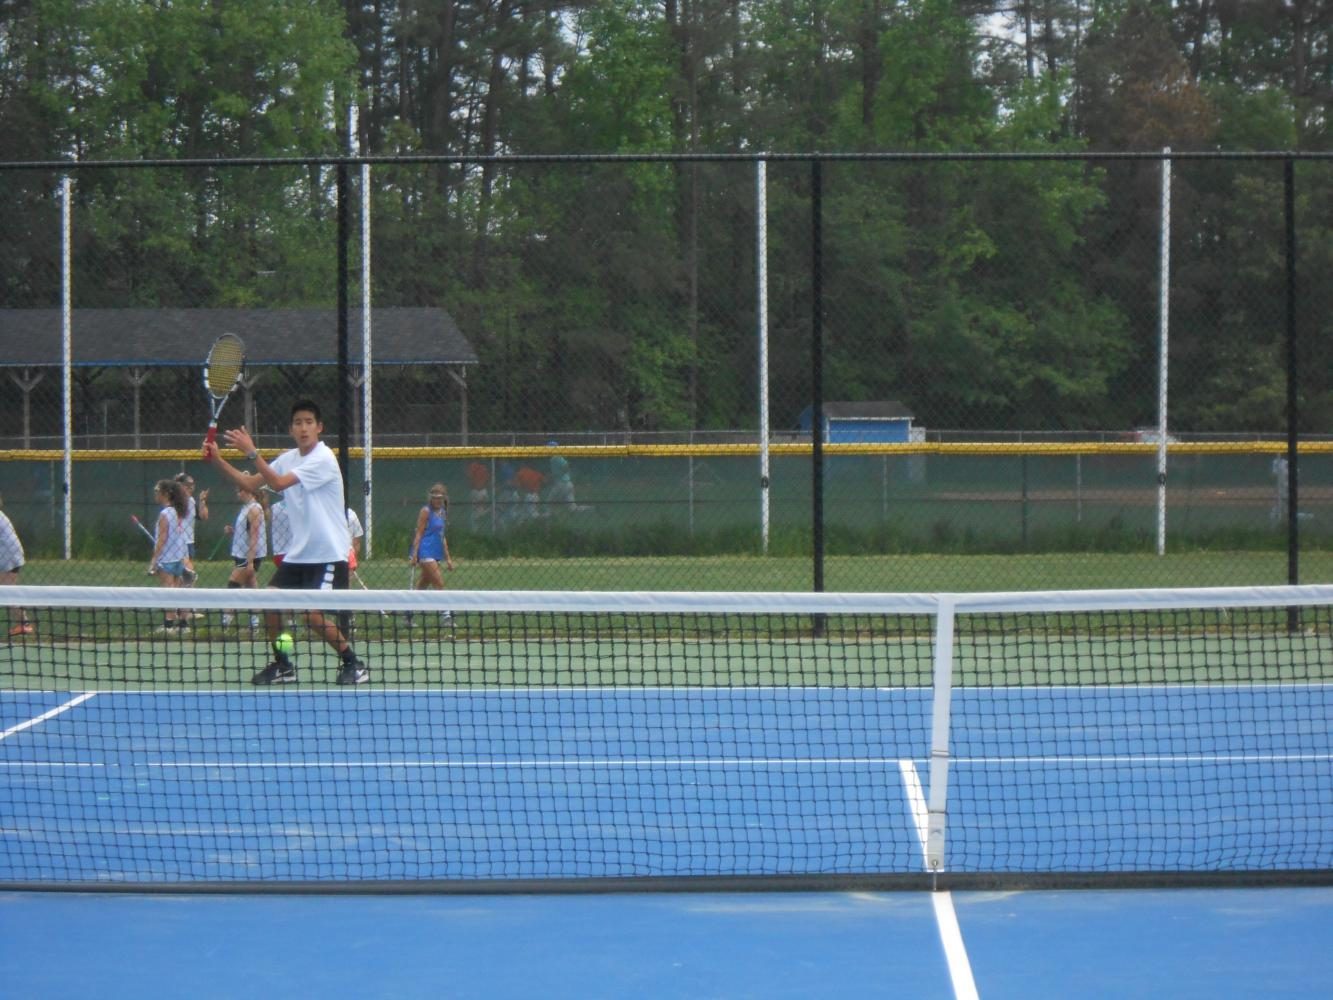 Athens mens tennis team loses to Green Hope 9-0